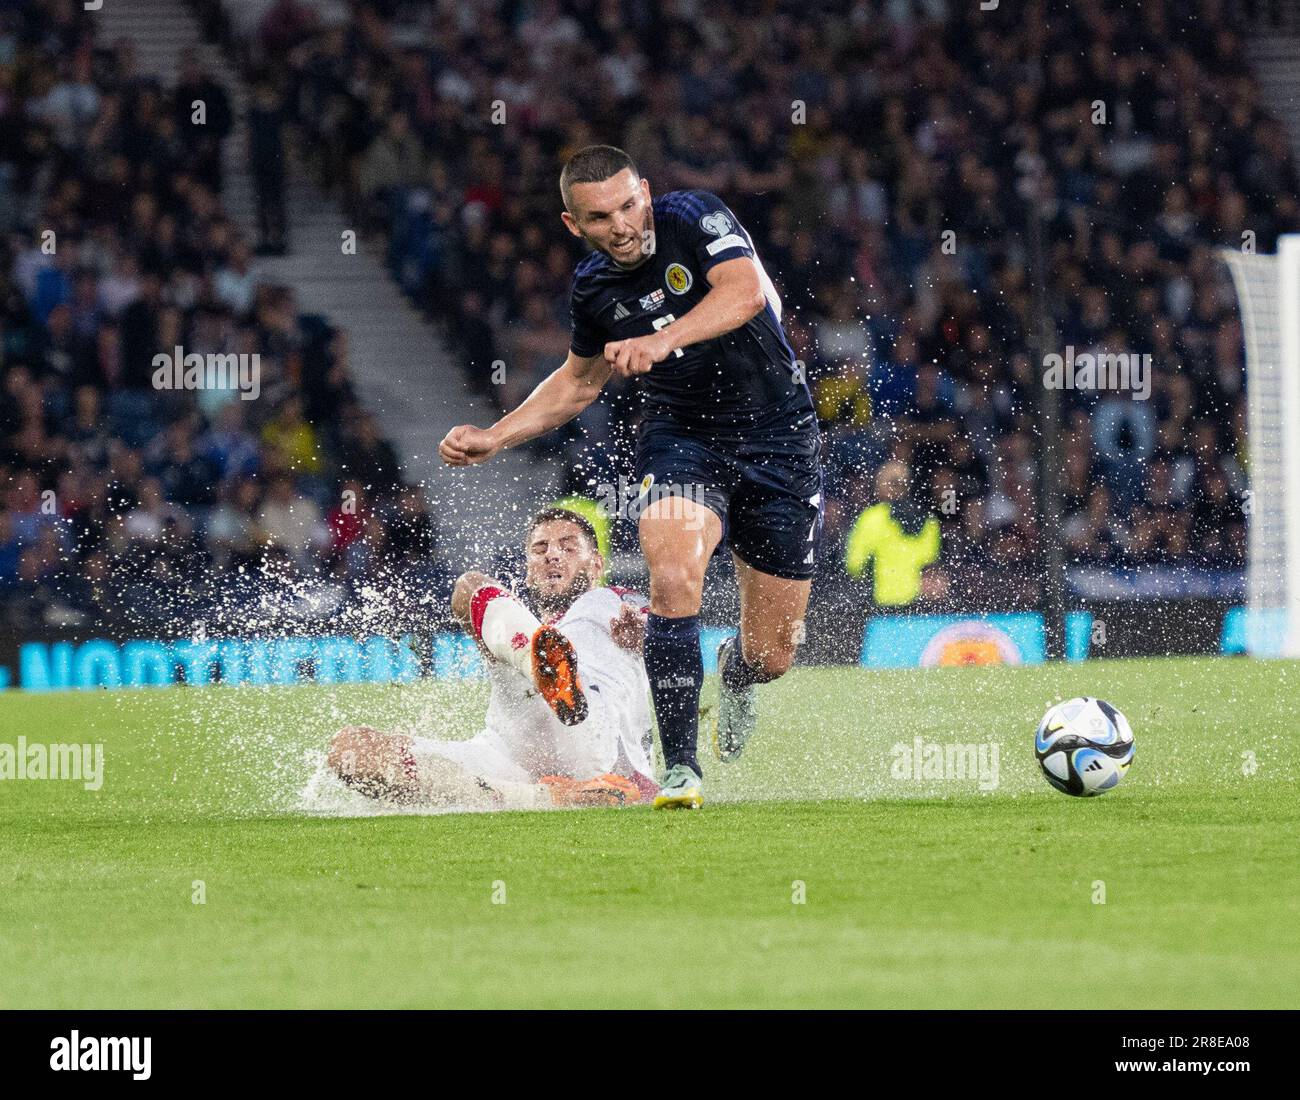 GLASGOW, SCOTLAND - JUNE 20: Scotland midfielder, John McGinn, brings the ball upfield during the UEFA EURO 2024 qualifying round group A match between Scotland and Georgia at Hampden Park on June 20, 2023 in Glasgow, Scotland. (Photo by Ian Jacobs/MB Media/) Stock Photo